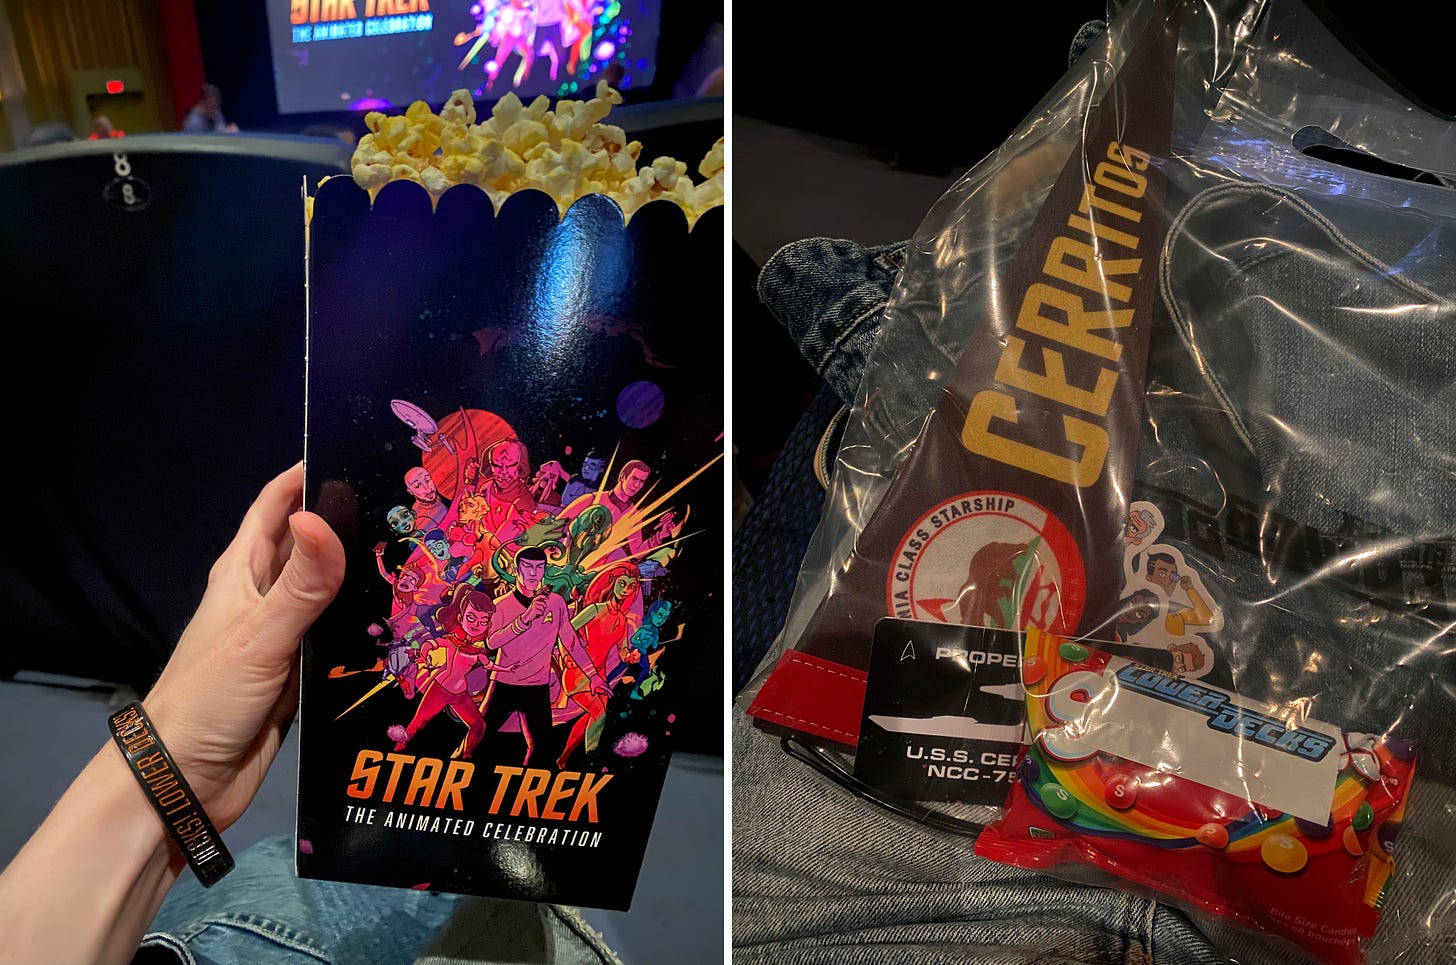 Left image: a black popcorn box with art featuring animated Star Trek characters, largely in shades of red and pink. Below them is text that reads: "Star Trek: the animated celebration" in all caps. My hand is holding the box and I have a rubber bracelet on that reads "Lower Decks! Lower Decks!". In the background you can see the theatre screen which features the same image as the popcorn box. Right image: A photo of a clear plastic bag on my lap, containing a bunch of Lower Decks stickers and a little pennant flag that reads 'CERRITOS', plus a bag of skittles with a Lower Decks sticker on it.